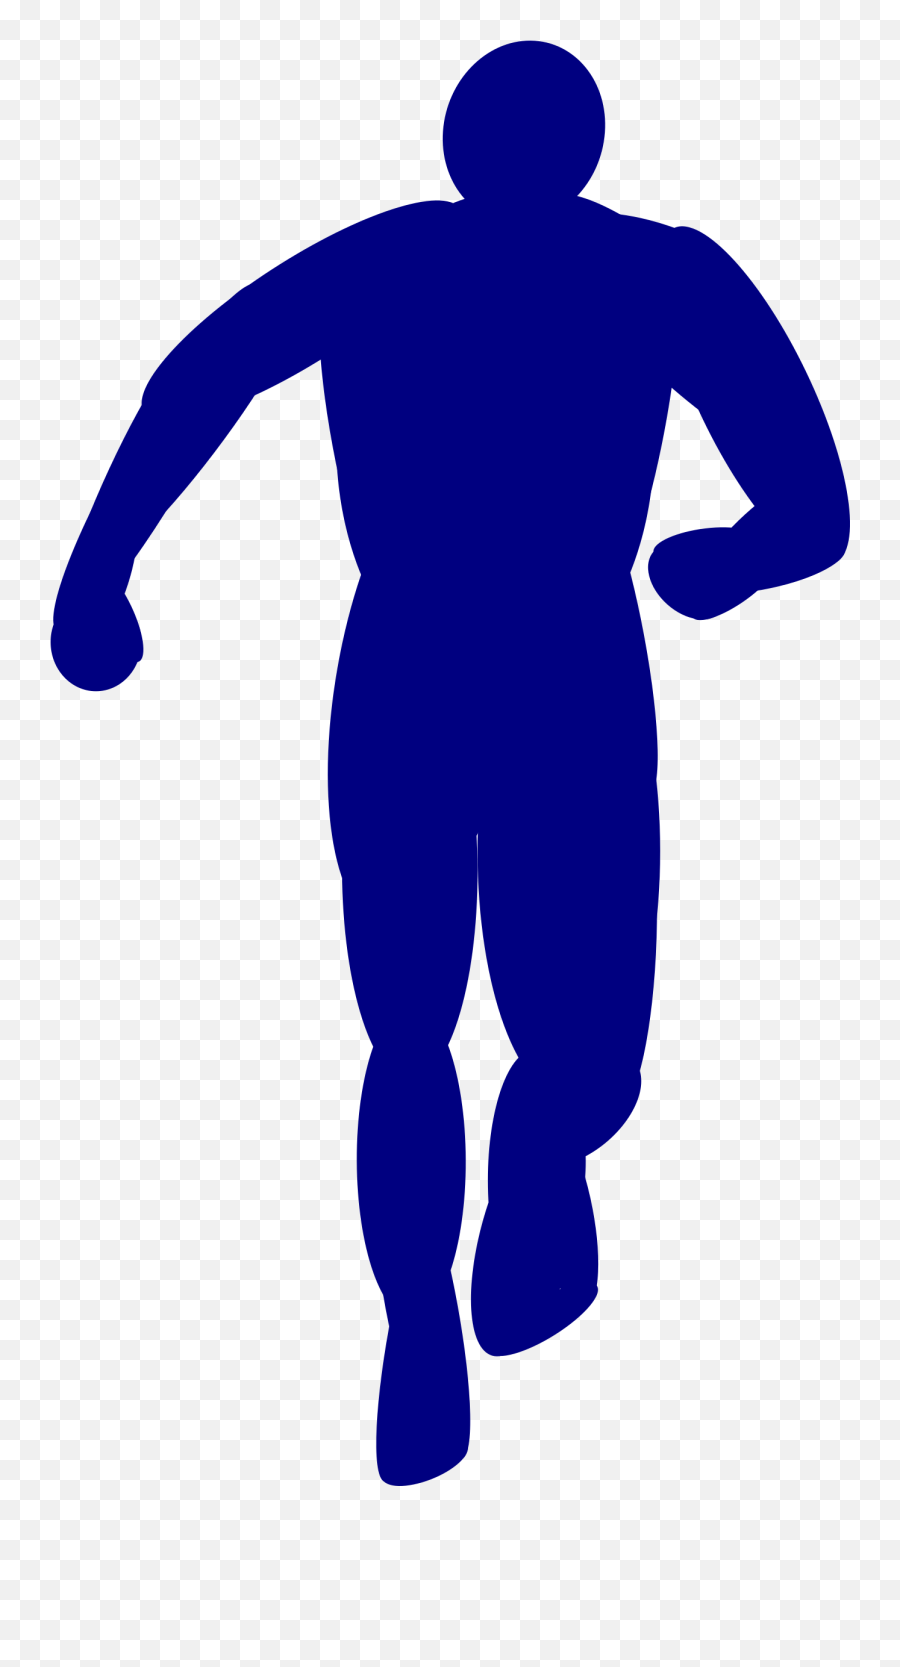 Download People - Running Man Clip Art Png Image With No Running Man Silhouette Back,People Running Png